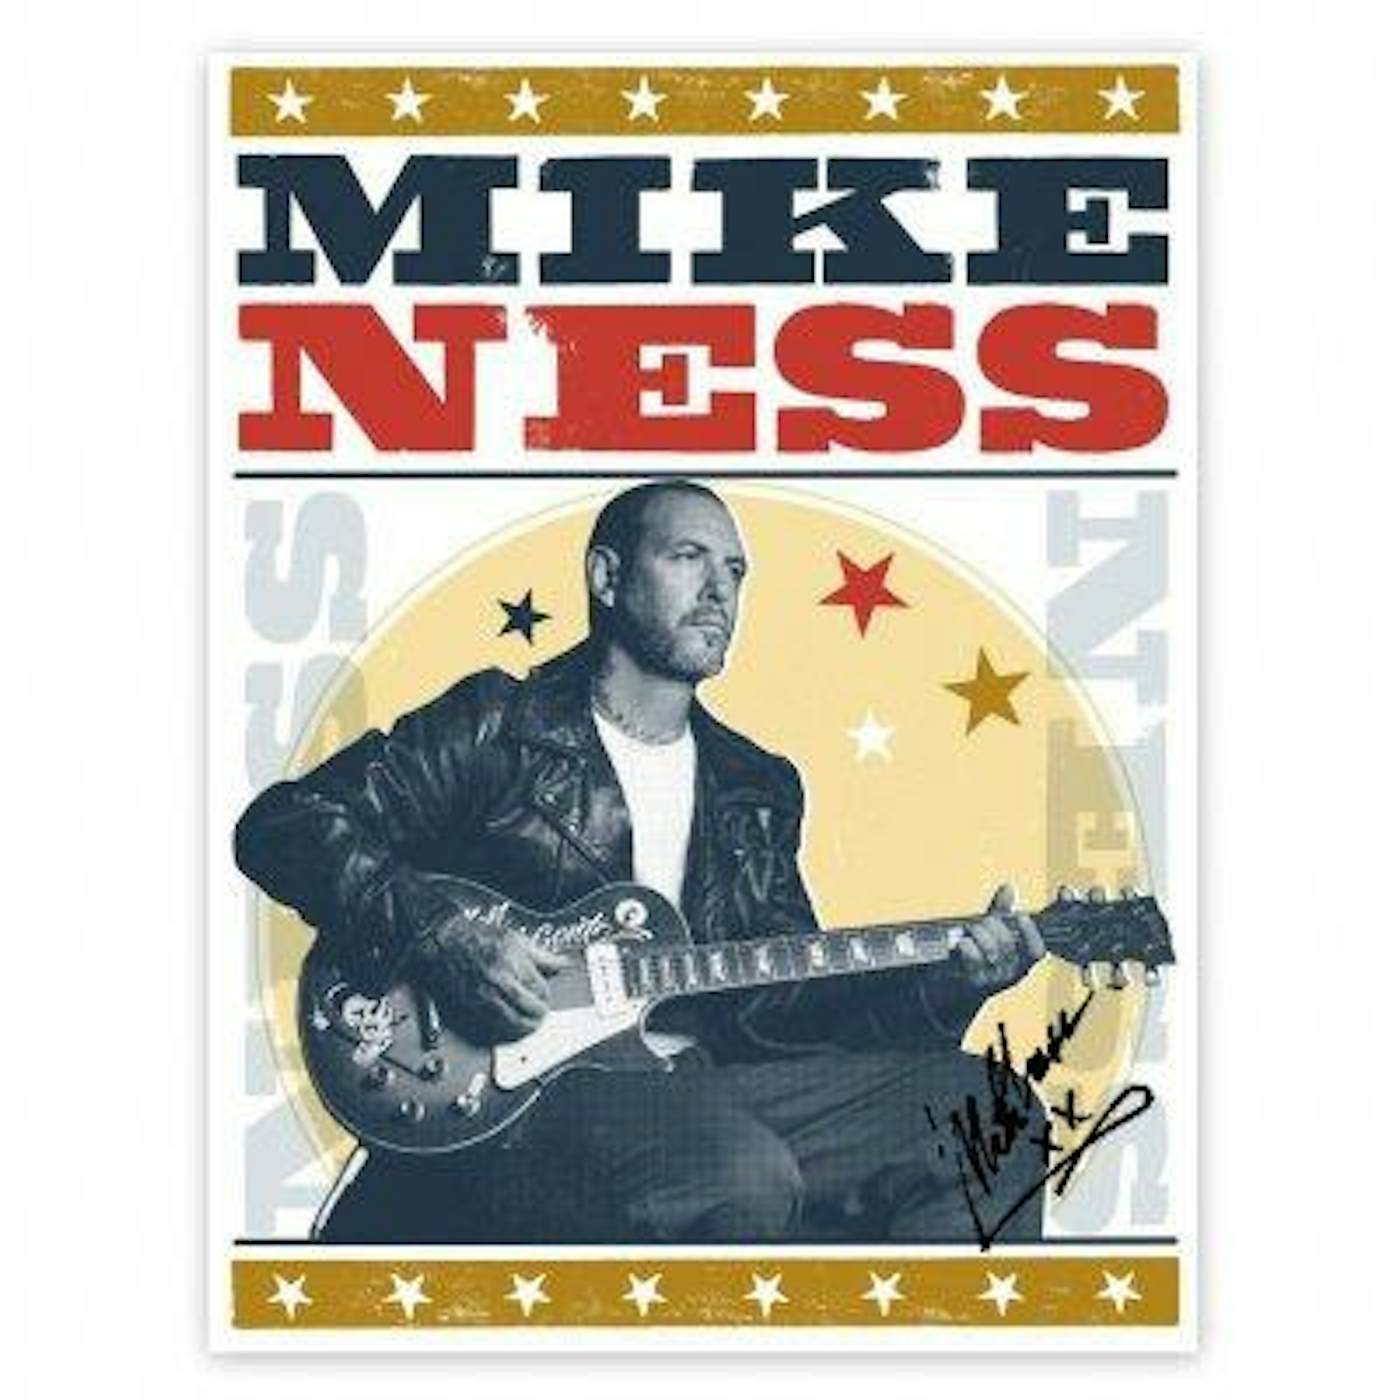 Mike Ness Stars Screen Print (Signed)